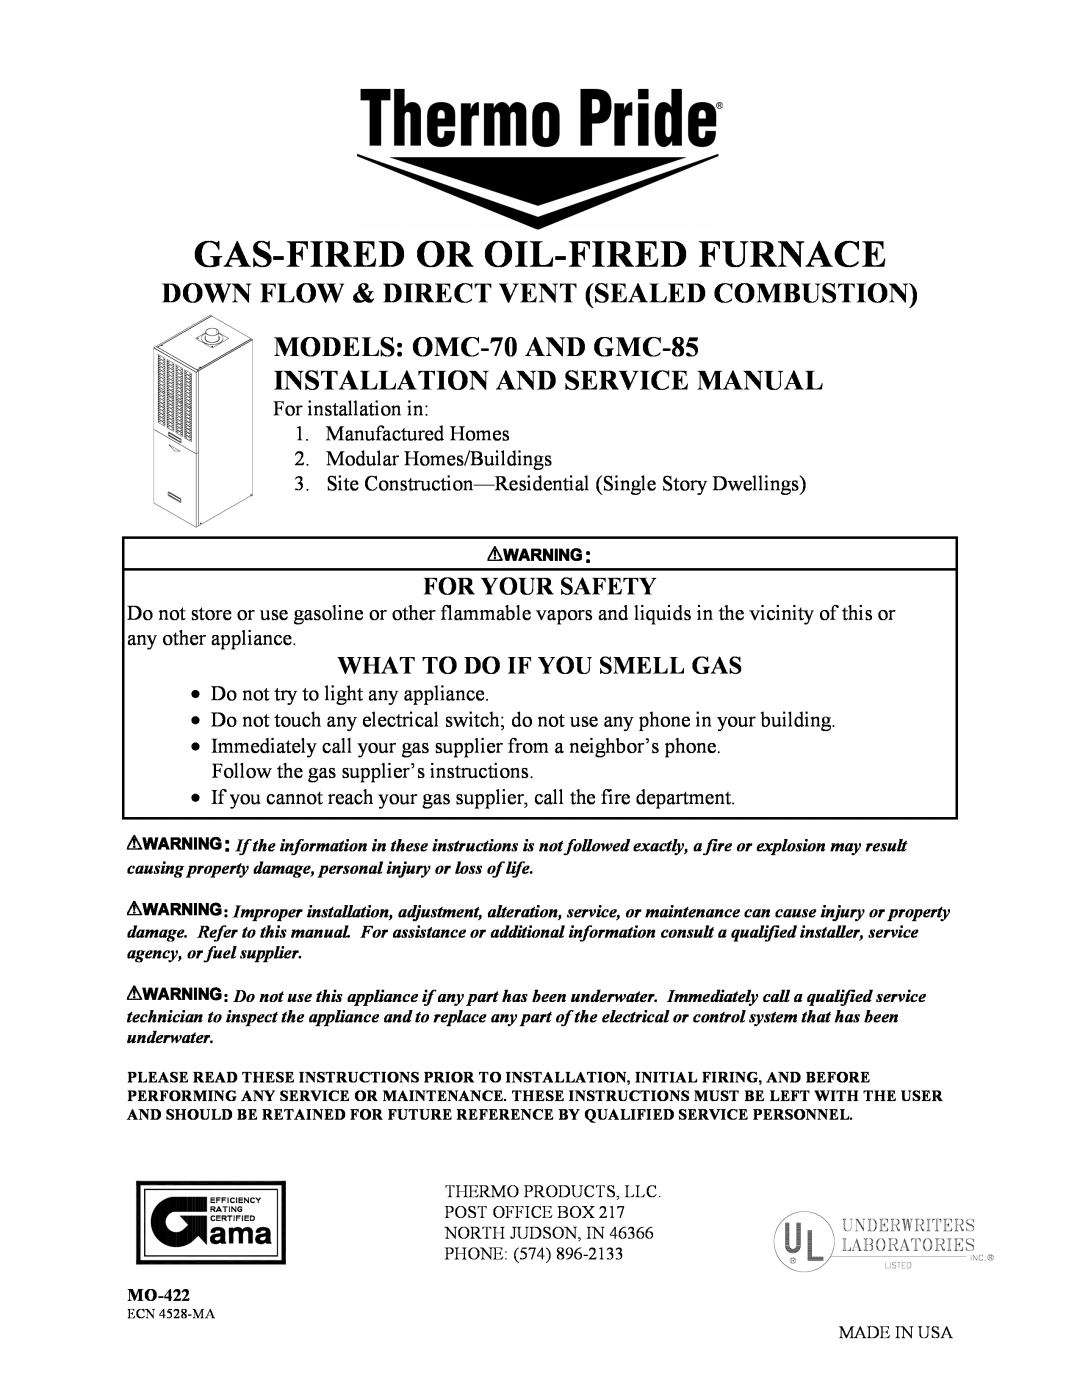 Thermo Products GMC-85, OMC-70 service manual Gas-Firedor Oil-Firedfurnace, Down Flow & Direct Vent Sealed Combustion 